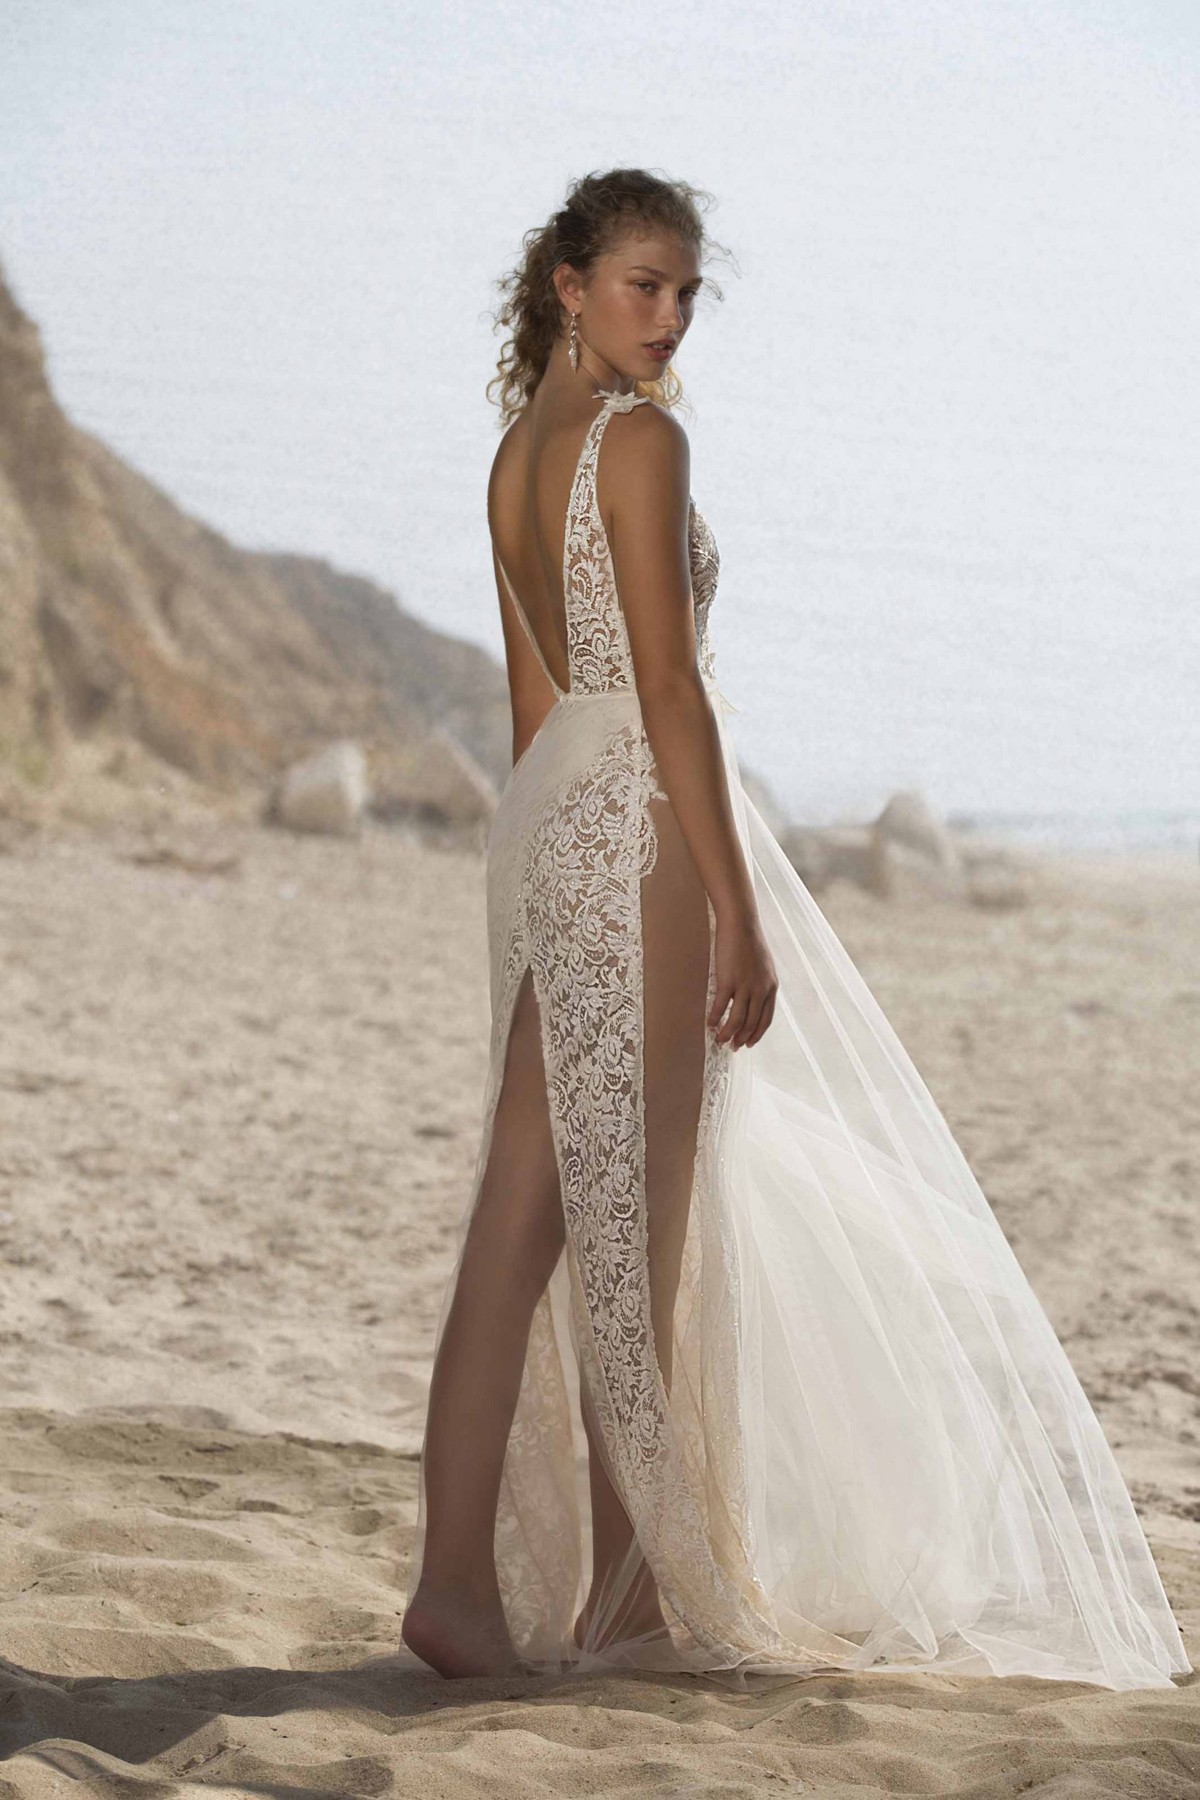 21-HEATHER Bridal Dress Inspirated By Berta Muse 2021 Vista Mare Collection